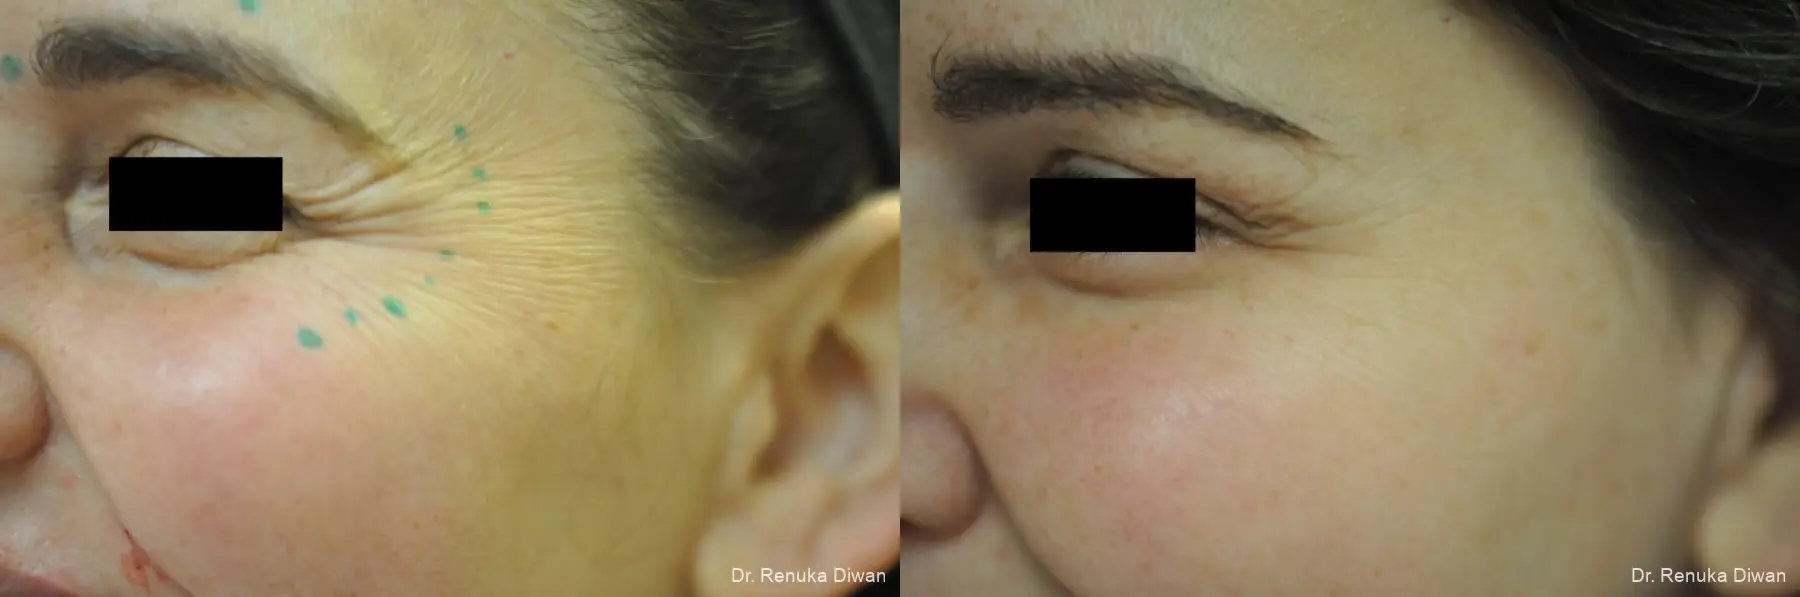 Crows Feet Creases: Patient 5 - Before and After  